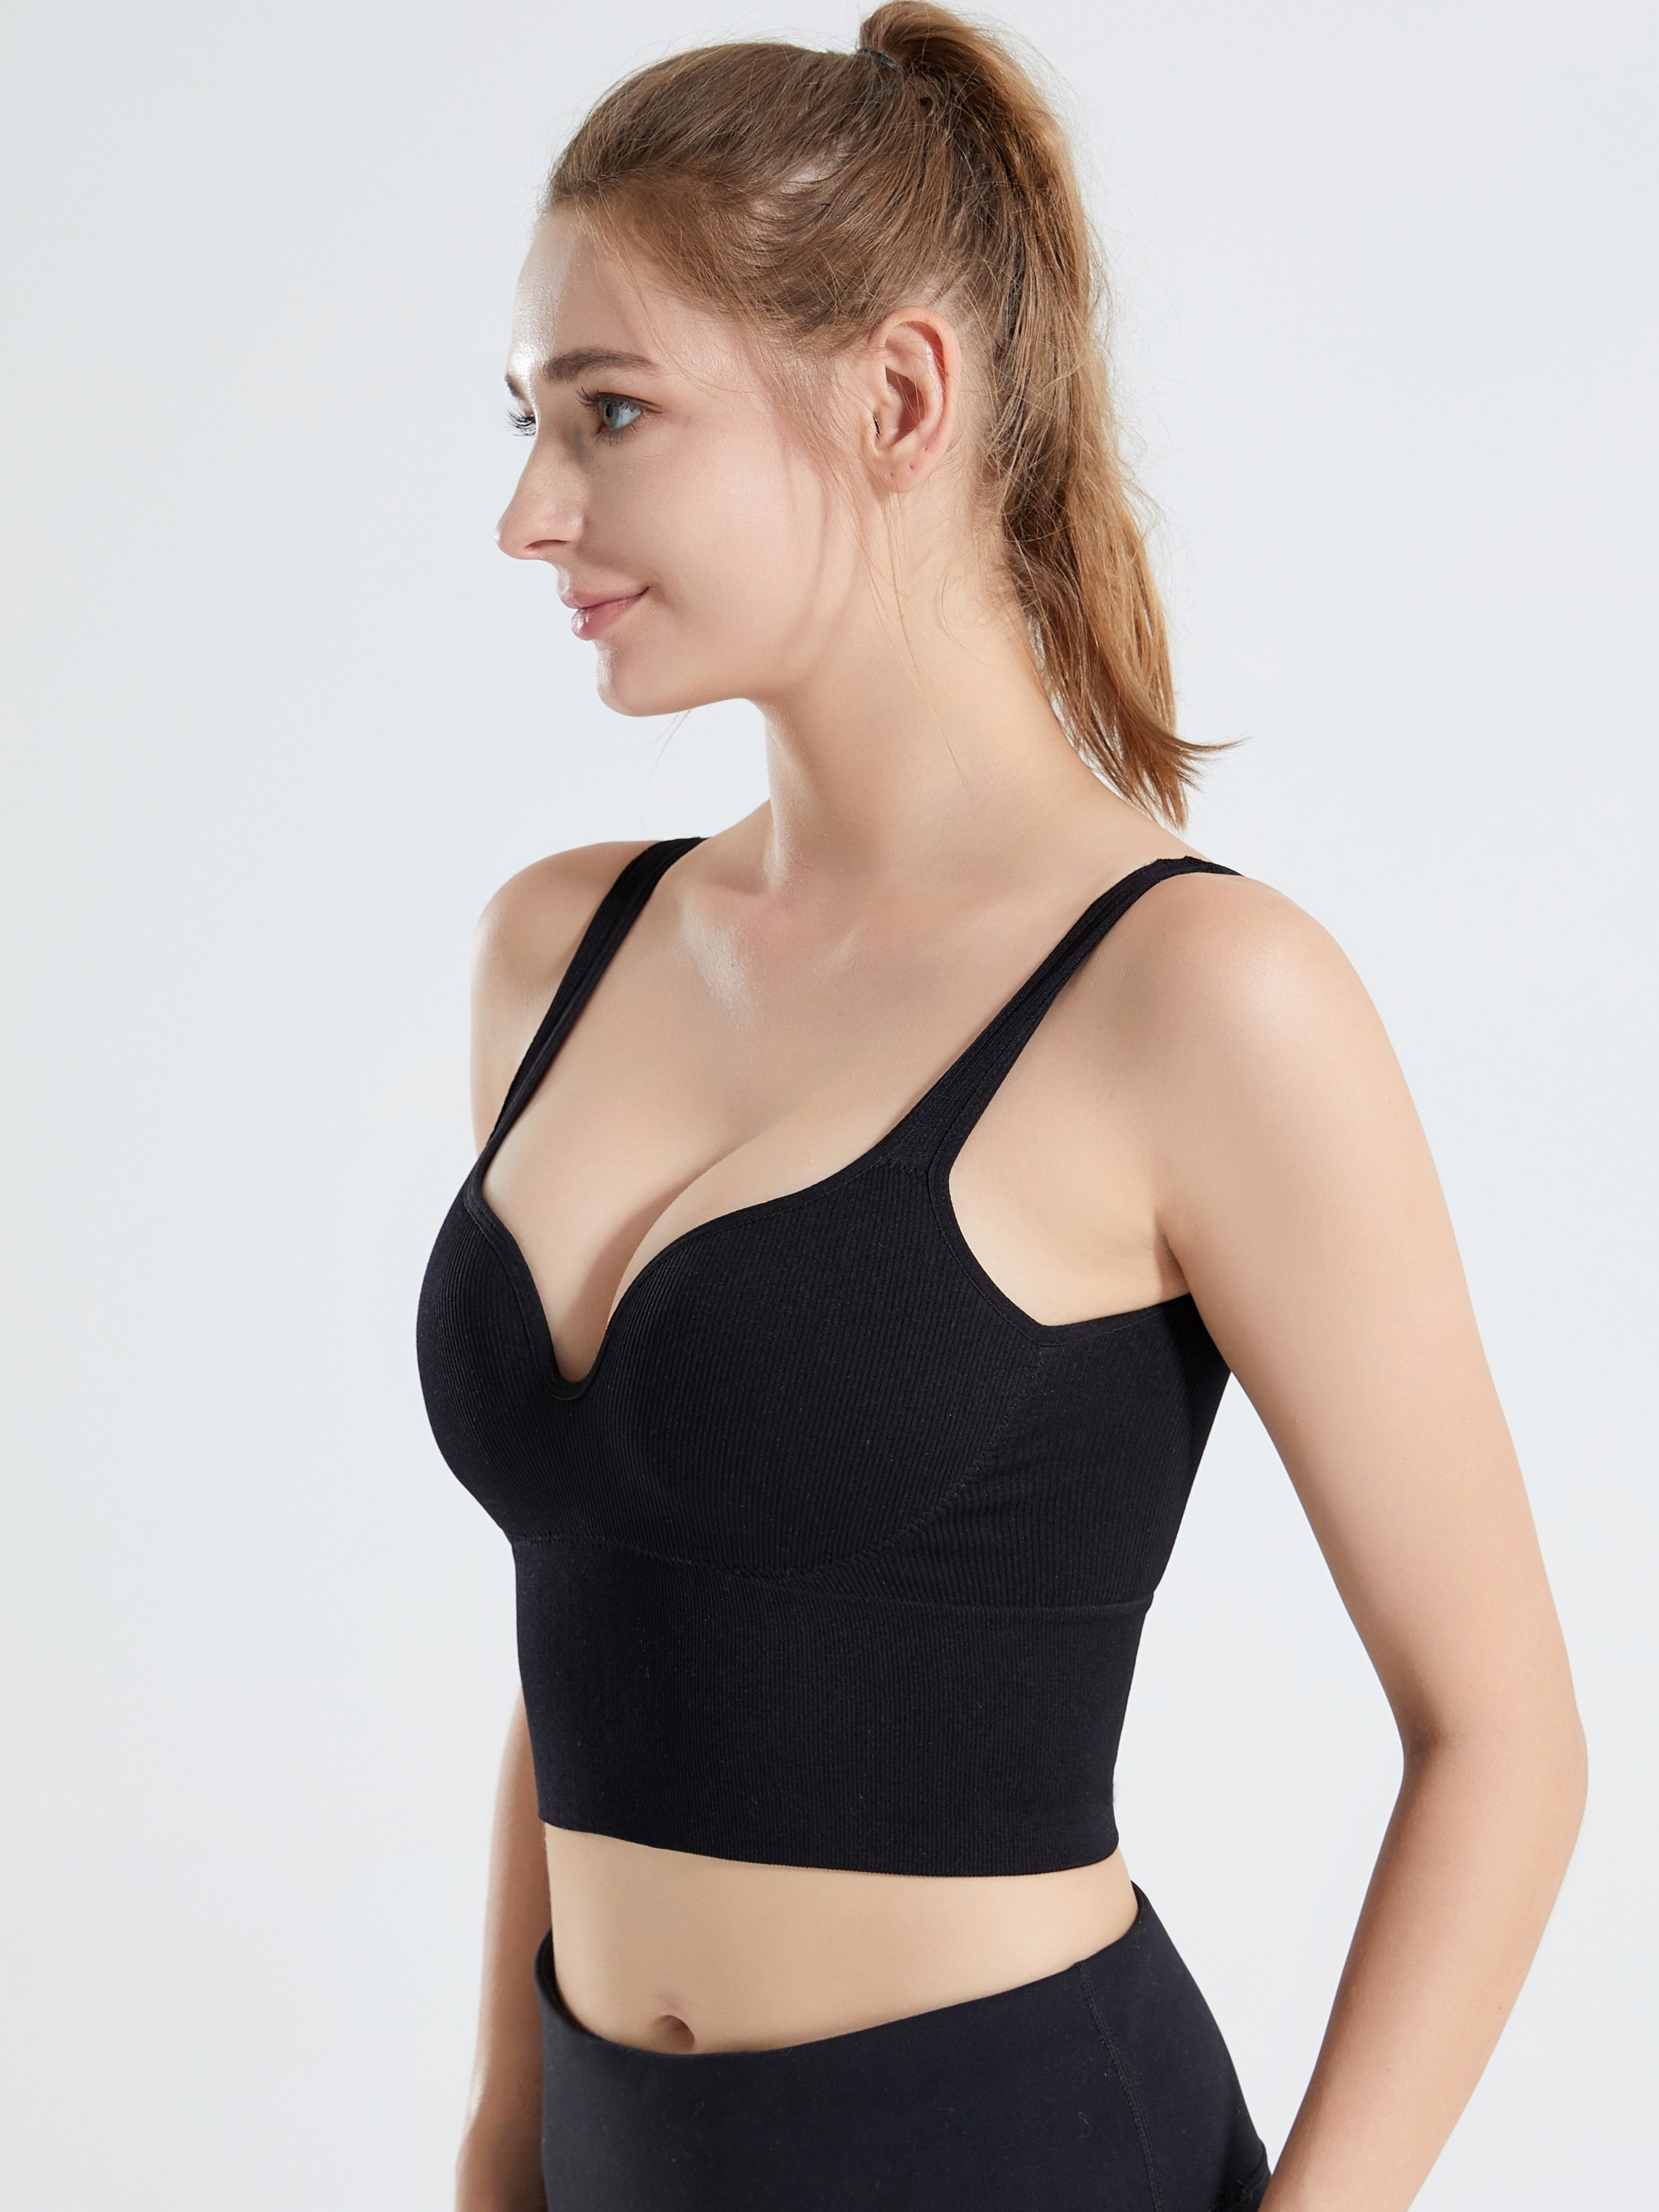 Strapless Sports Bras for Women High Support Large Bust Yoga Halter V-Neck  Wirefree Push Up V Neck Front Closure Seamless